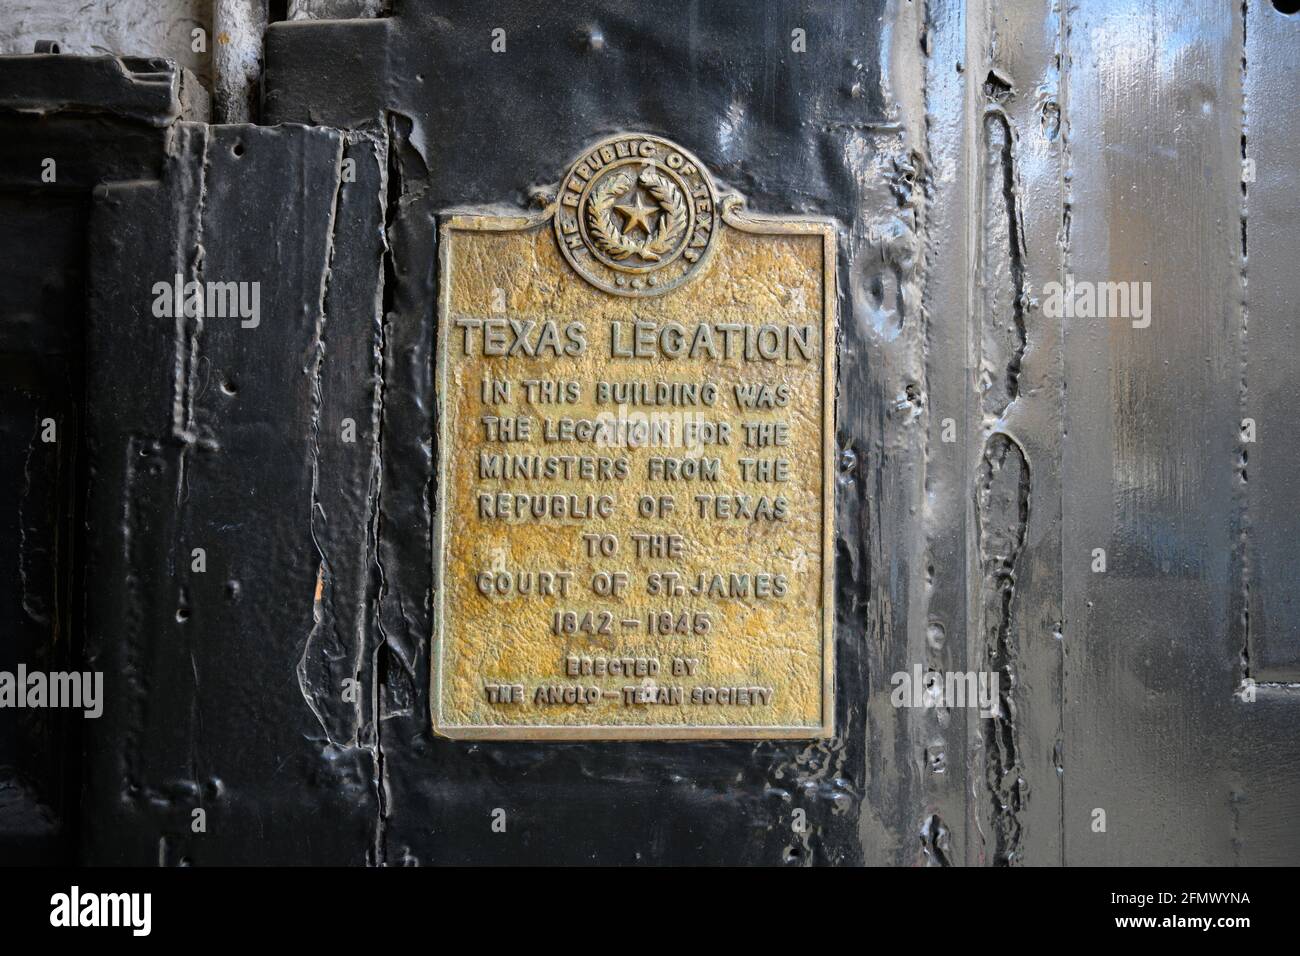 Historic Texas Legation plaque in Pickering Place, City of Westminster, London UK. 12 May 2021. Stock Photo